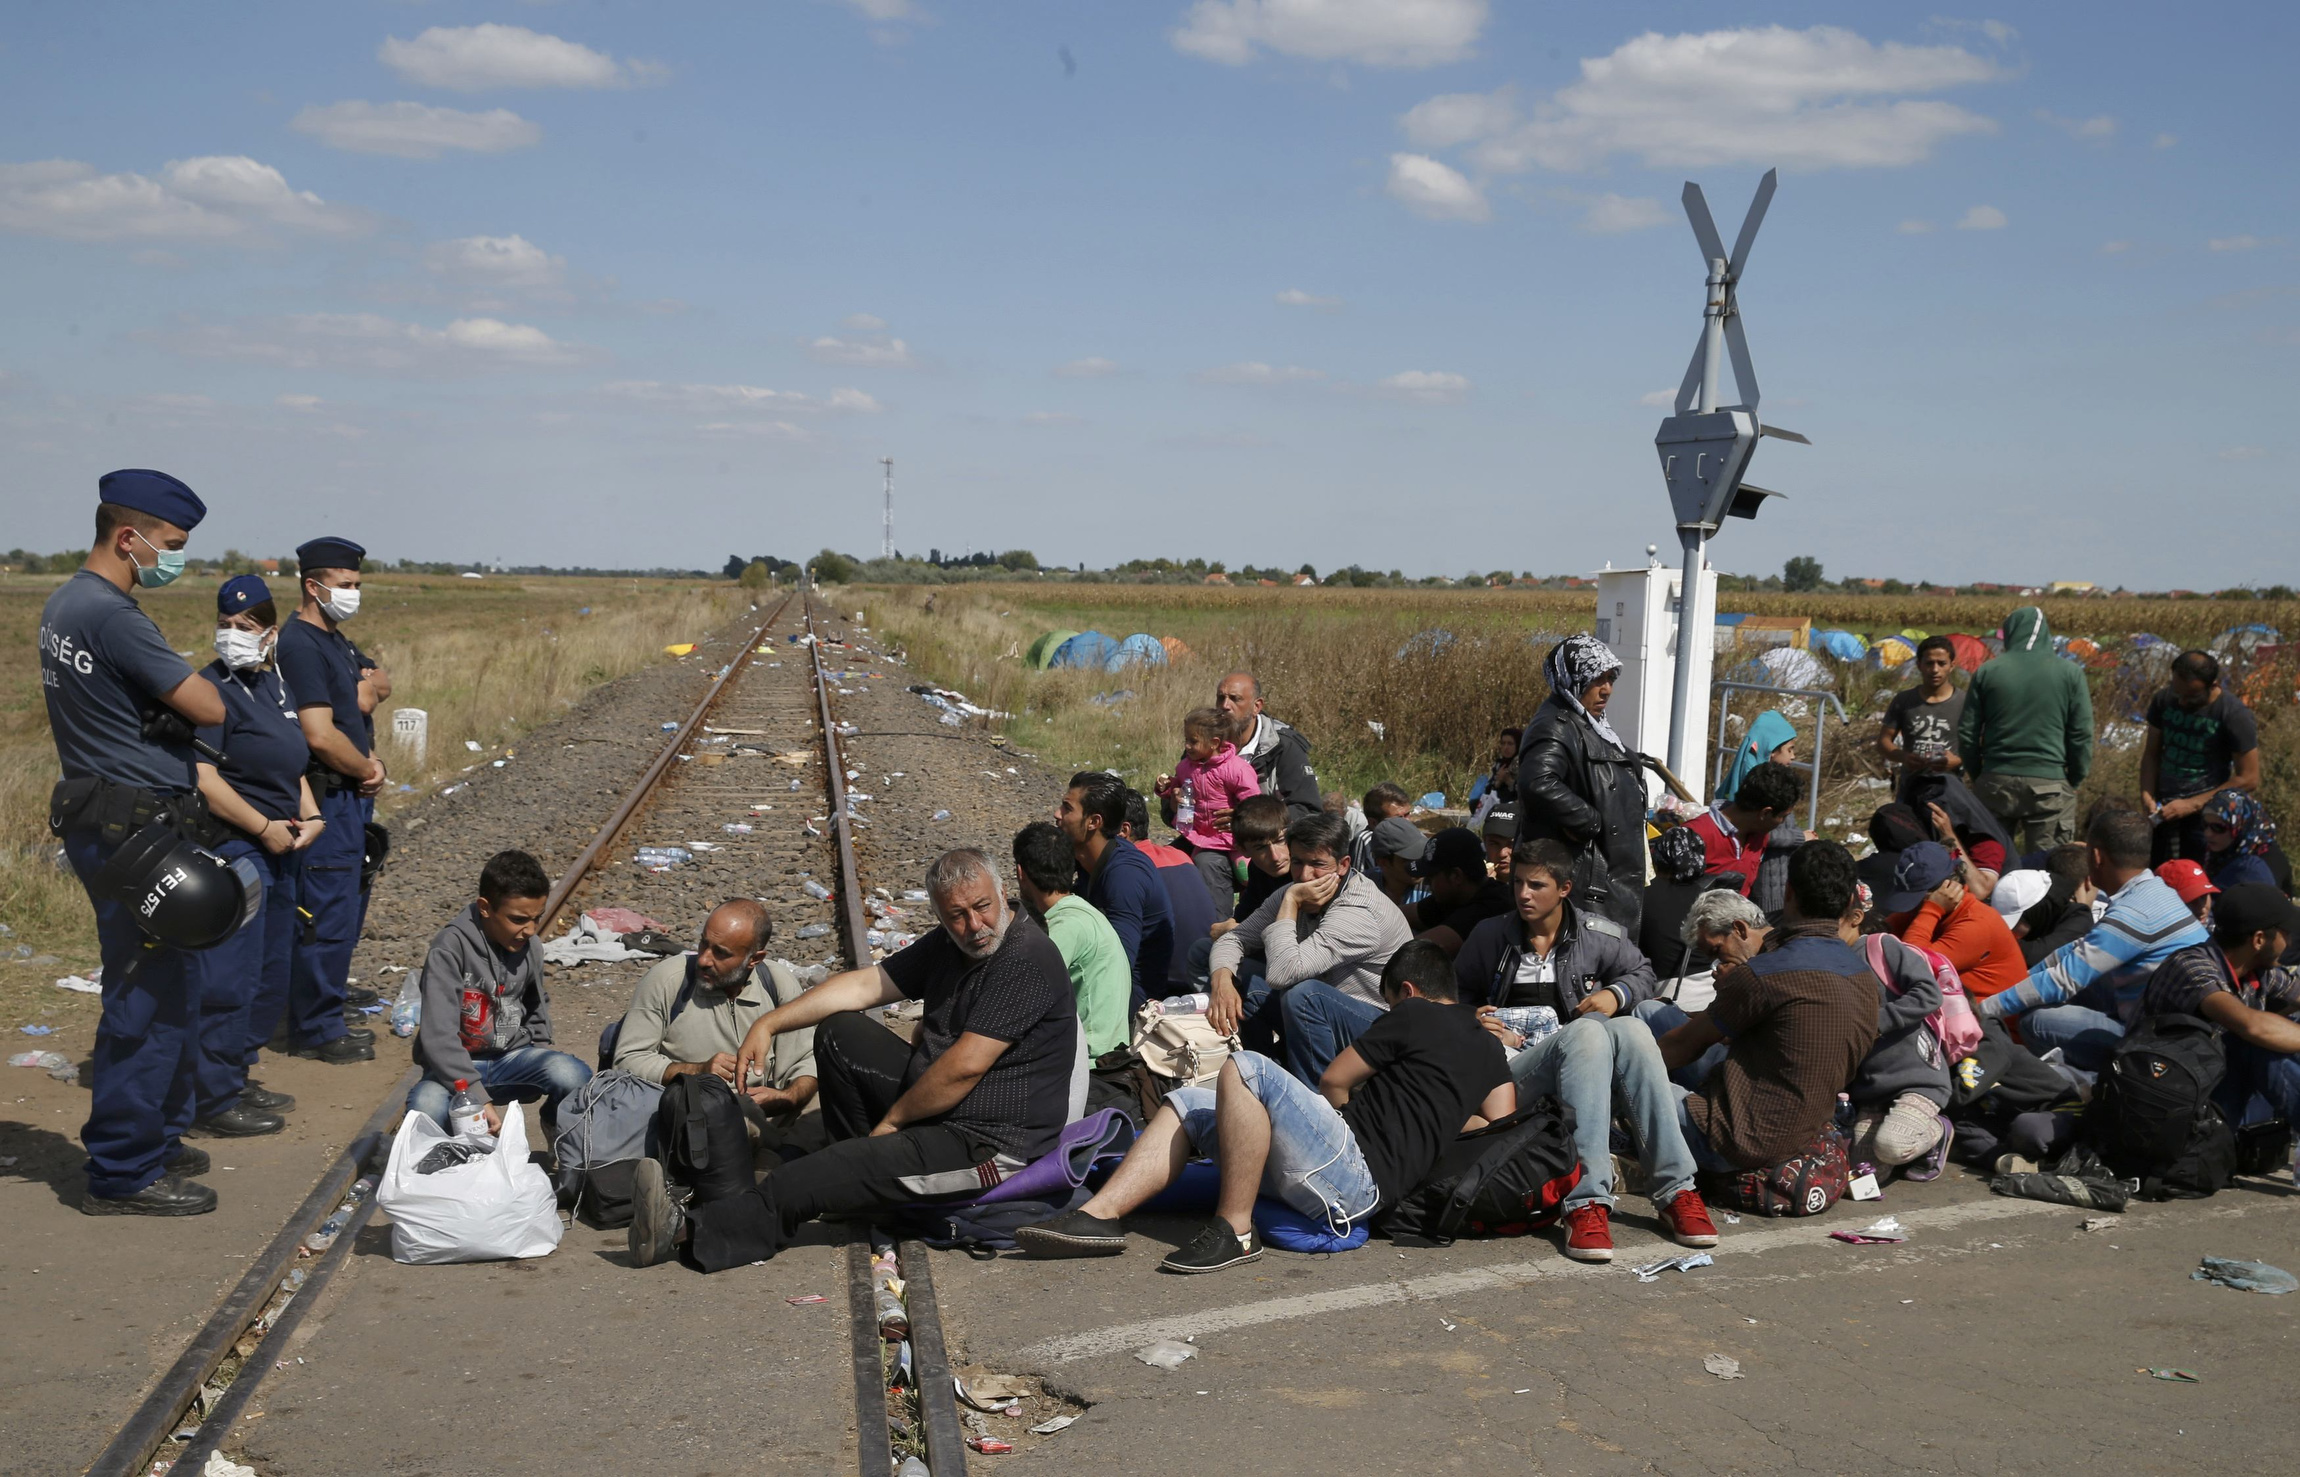 Hungarian policemen watch migrants near a collection point in Roszke Sept. 9. (CNS/Marko Djurica, Reuters)